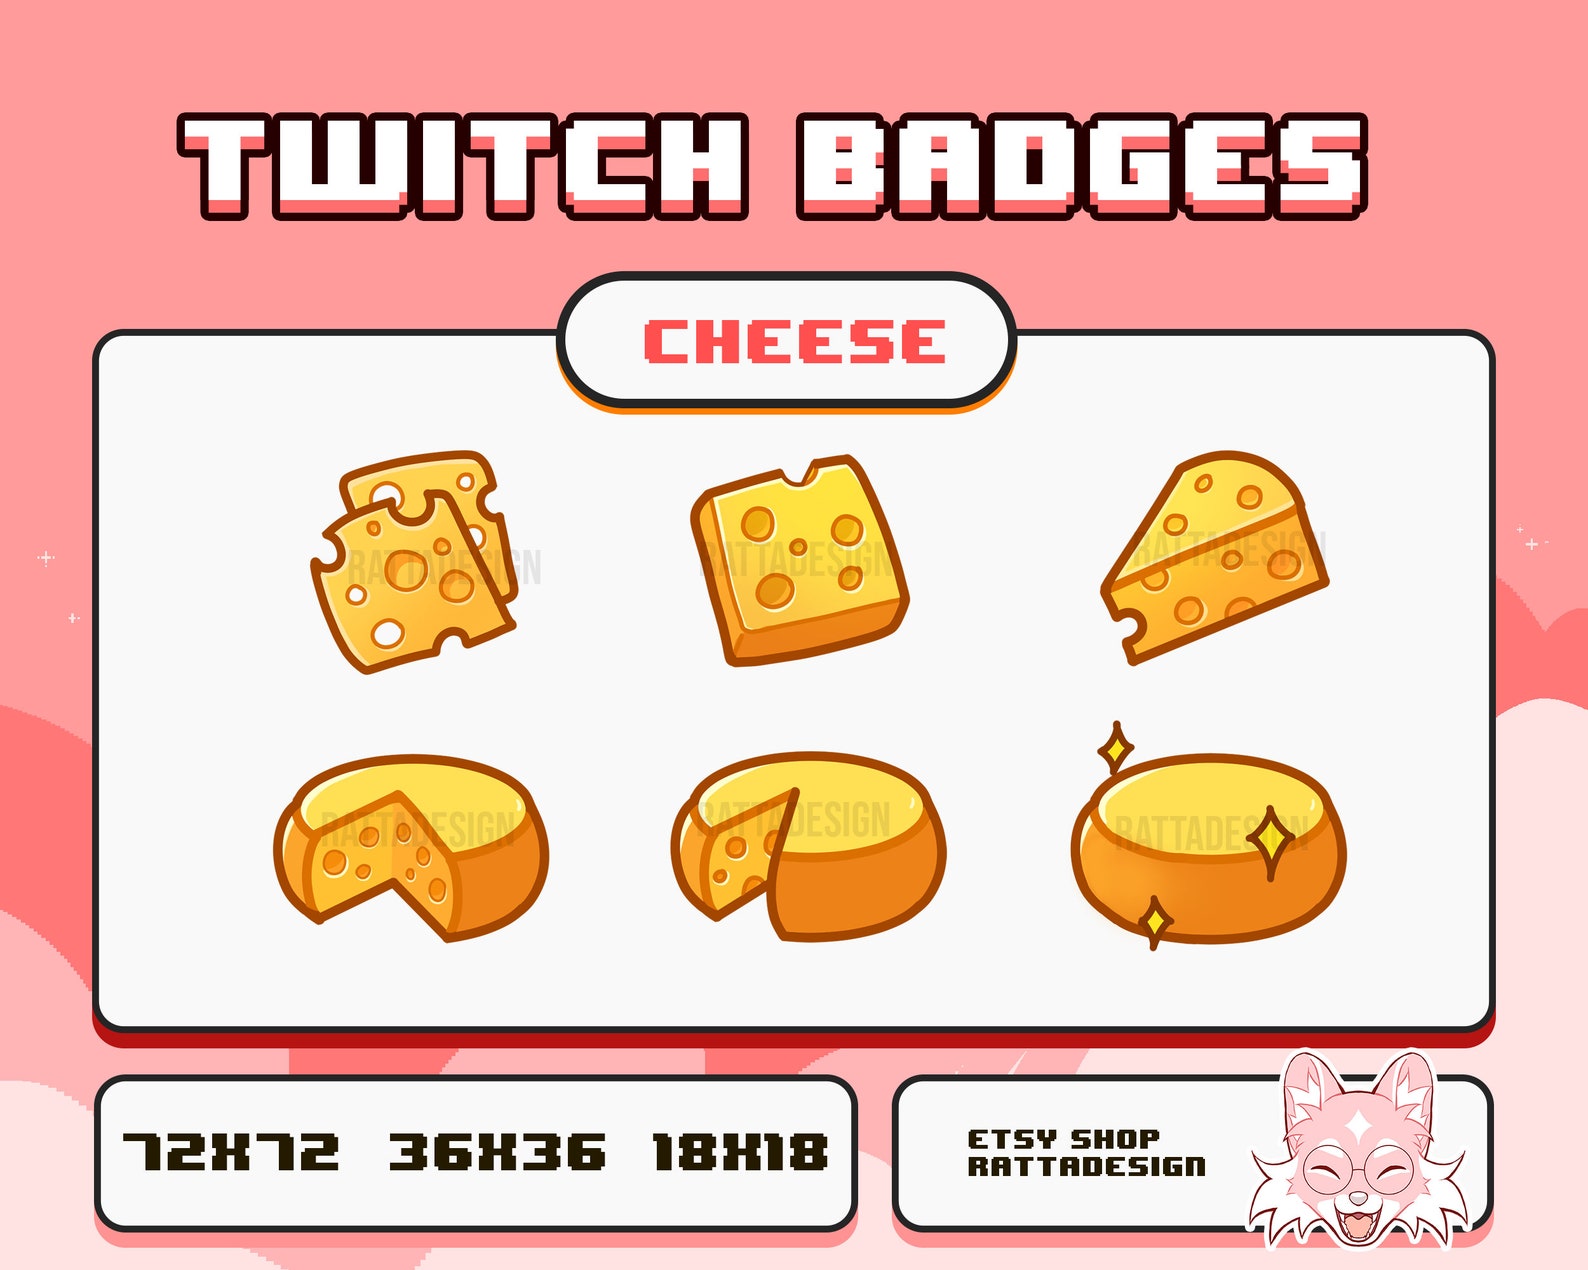 Fromage twitch